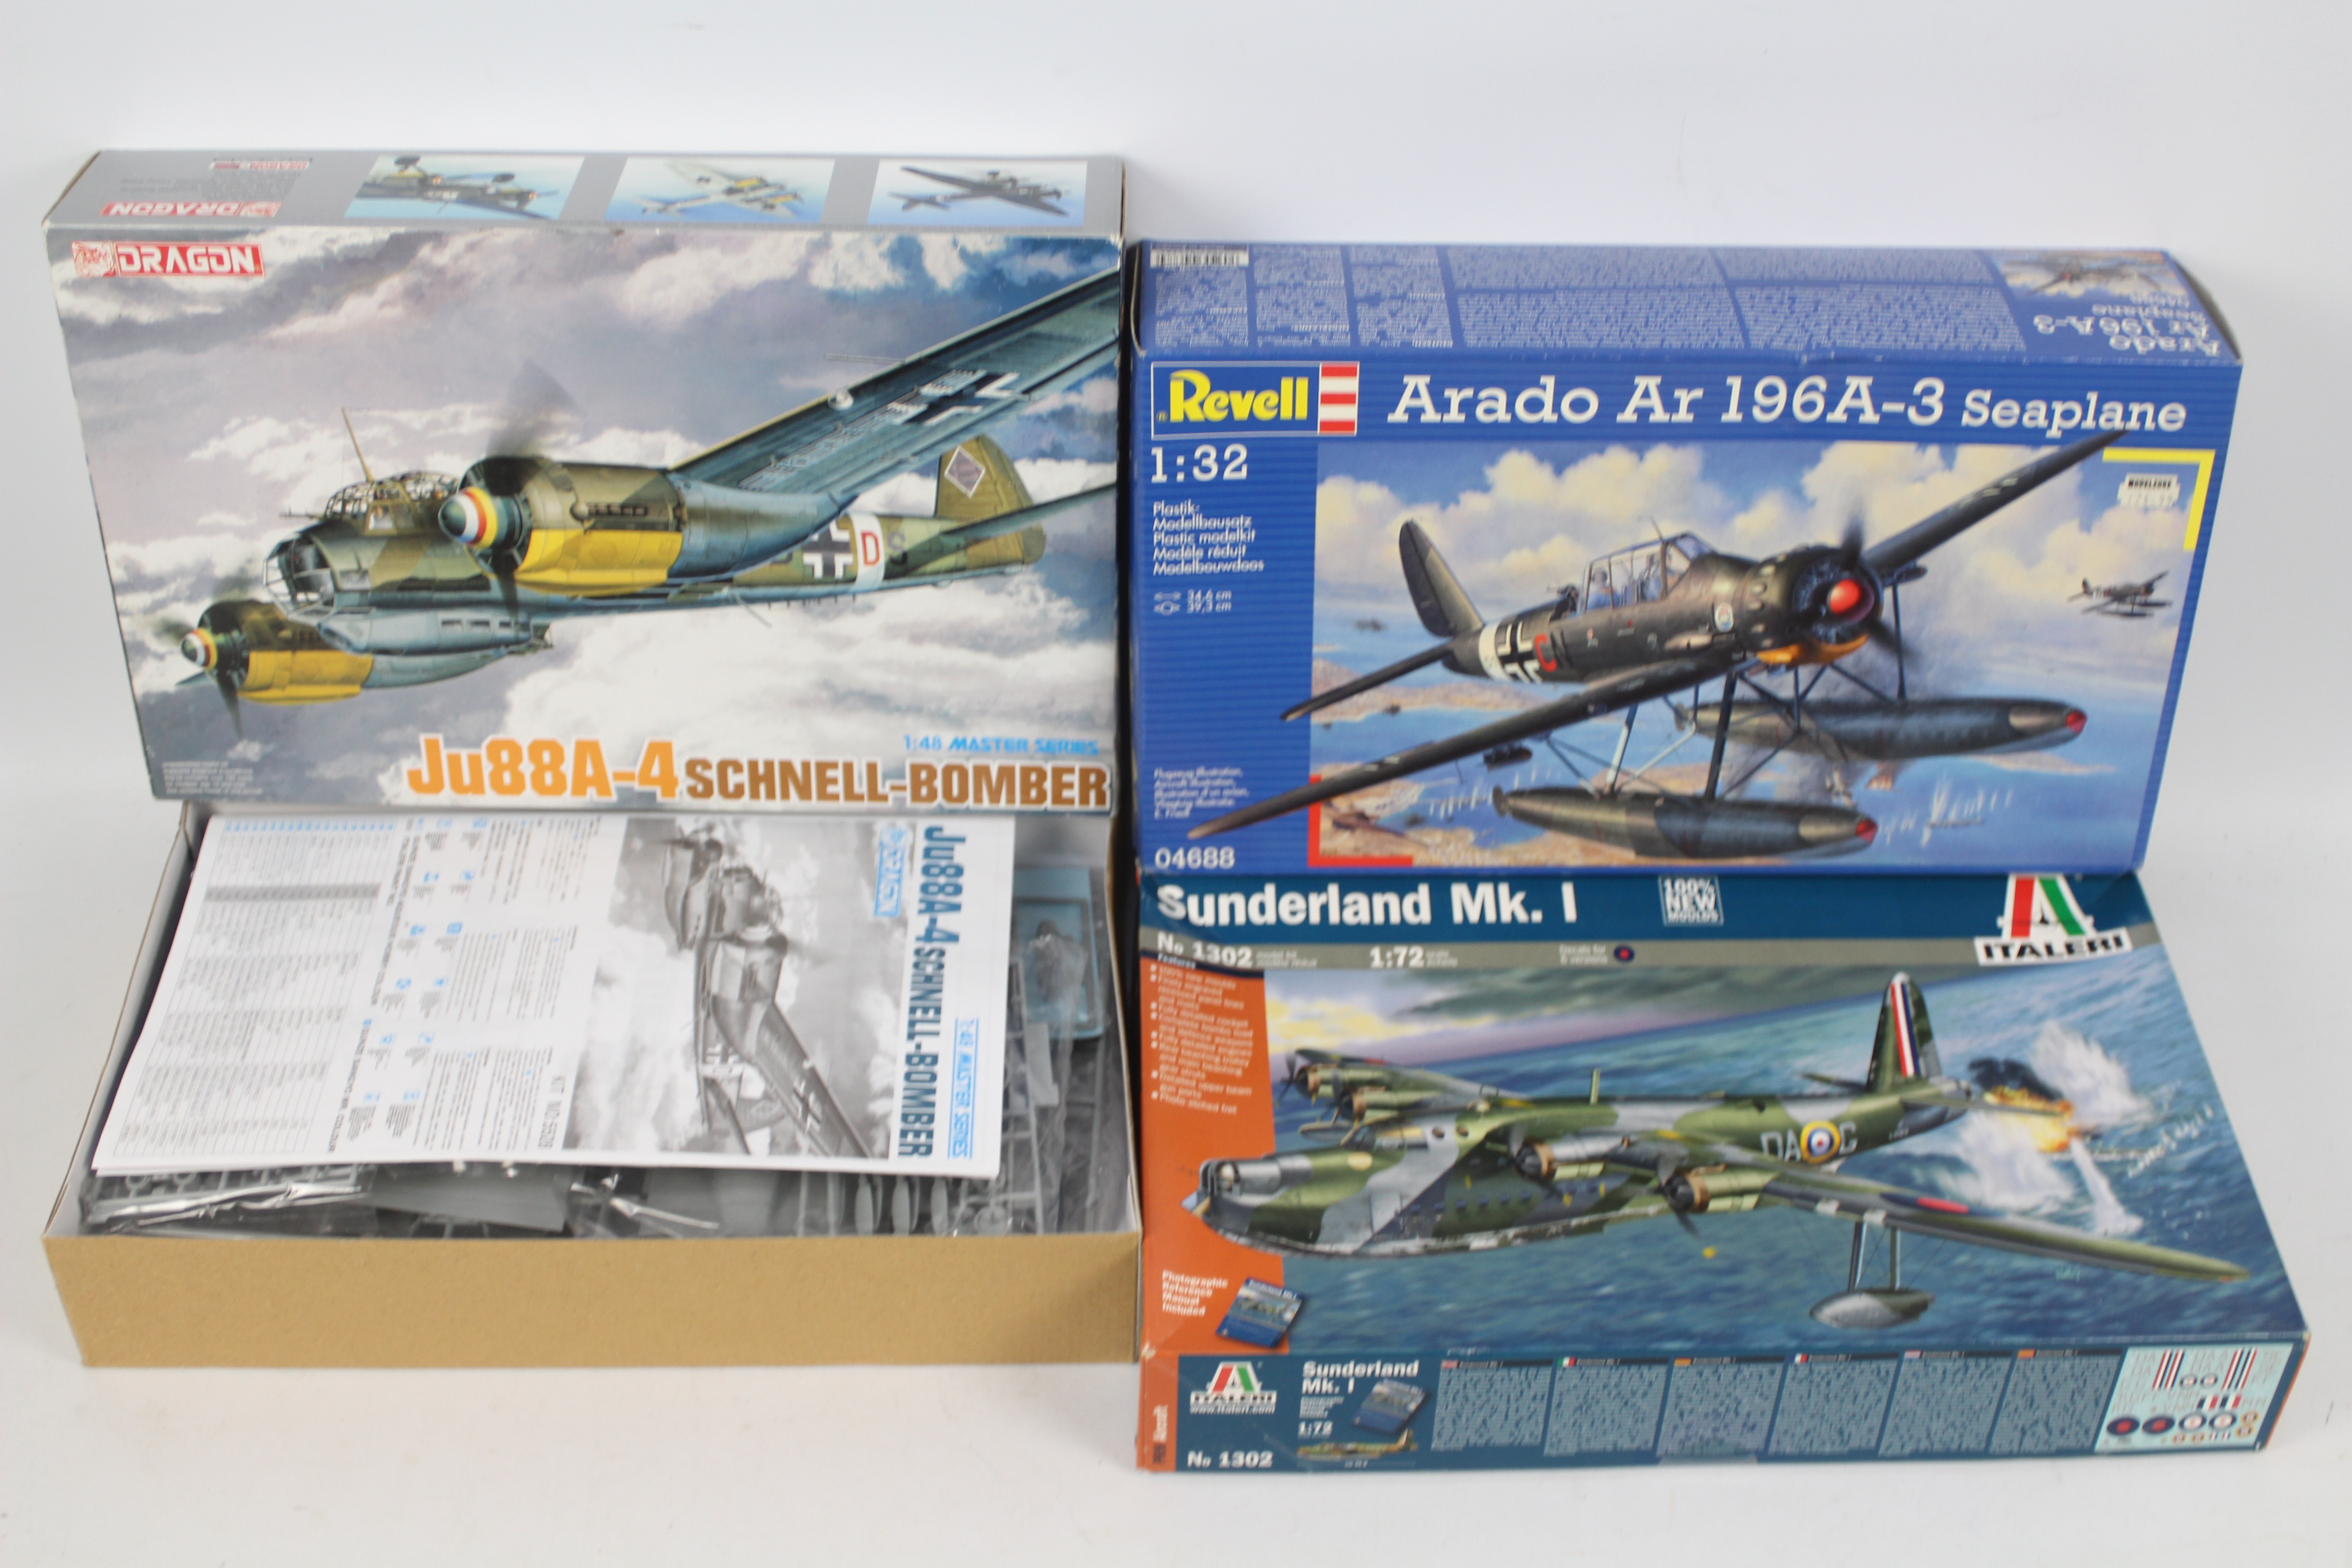 Italeri - Revell - Dragon - Three boxed military aircraft plastic model kits in various scales. - Image 3 of 4